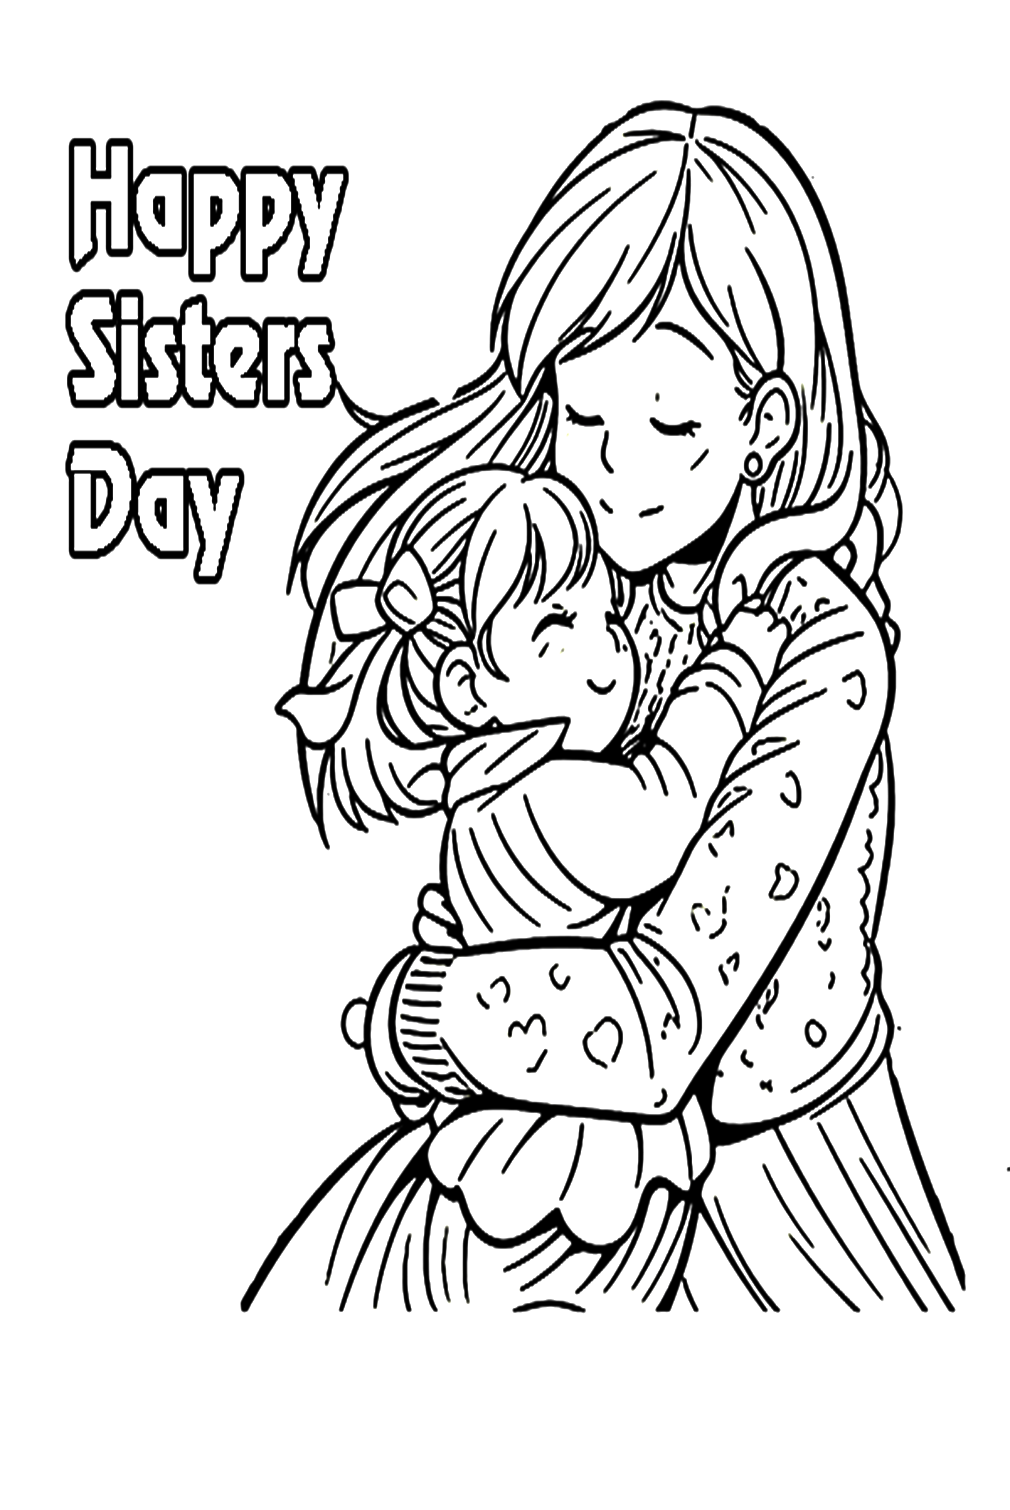 Happy Sisters Day Coloring Page from Sisters Day